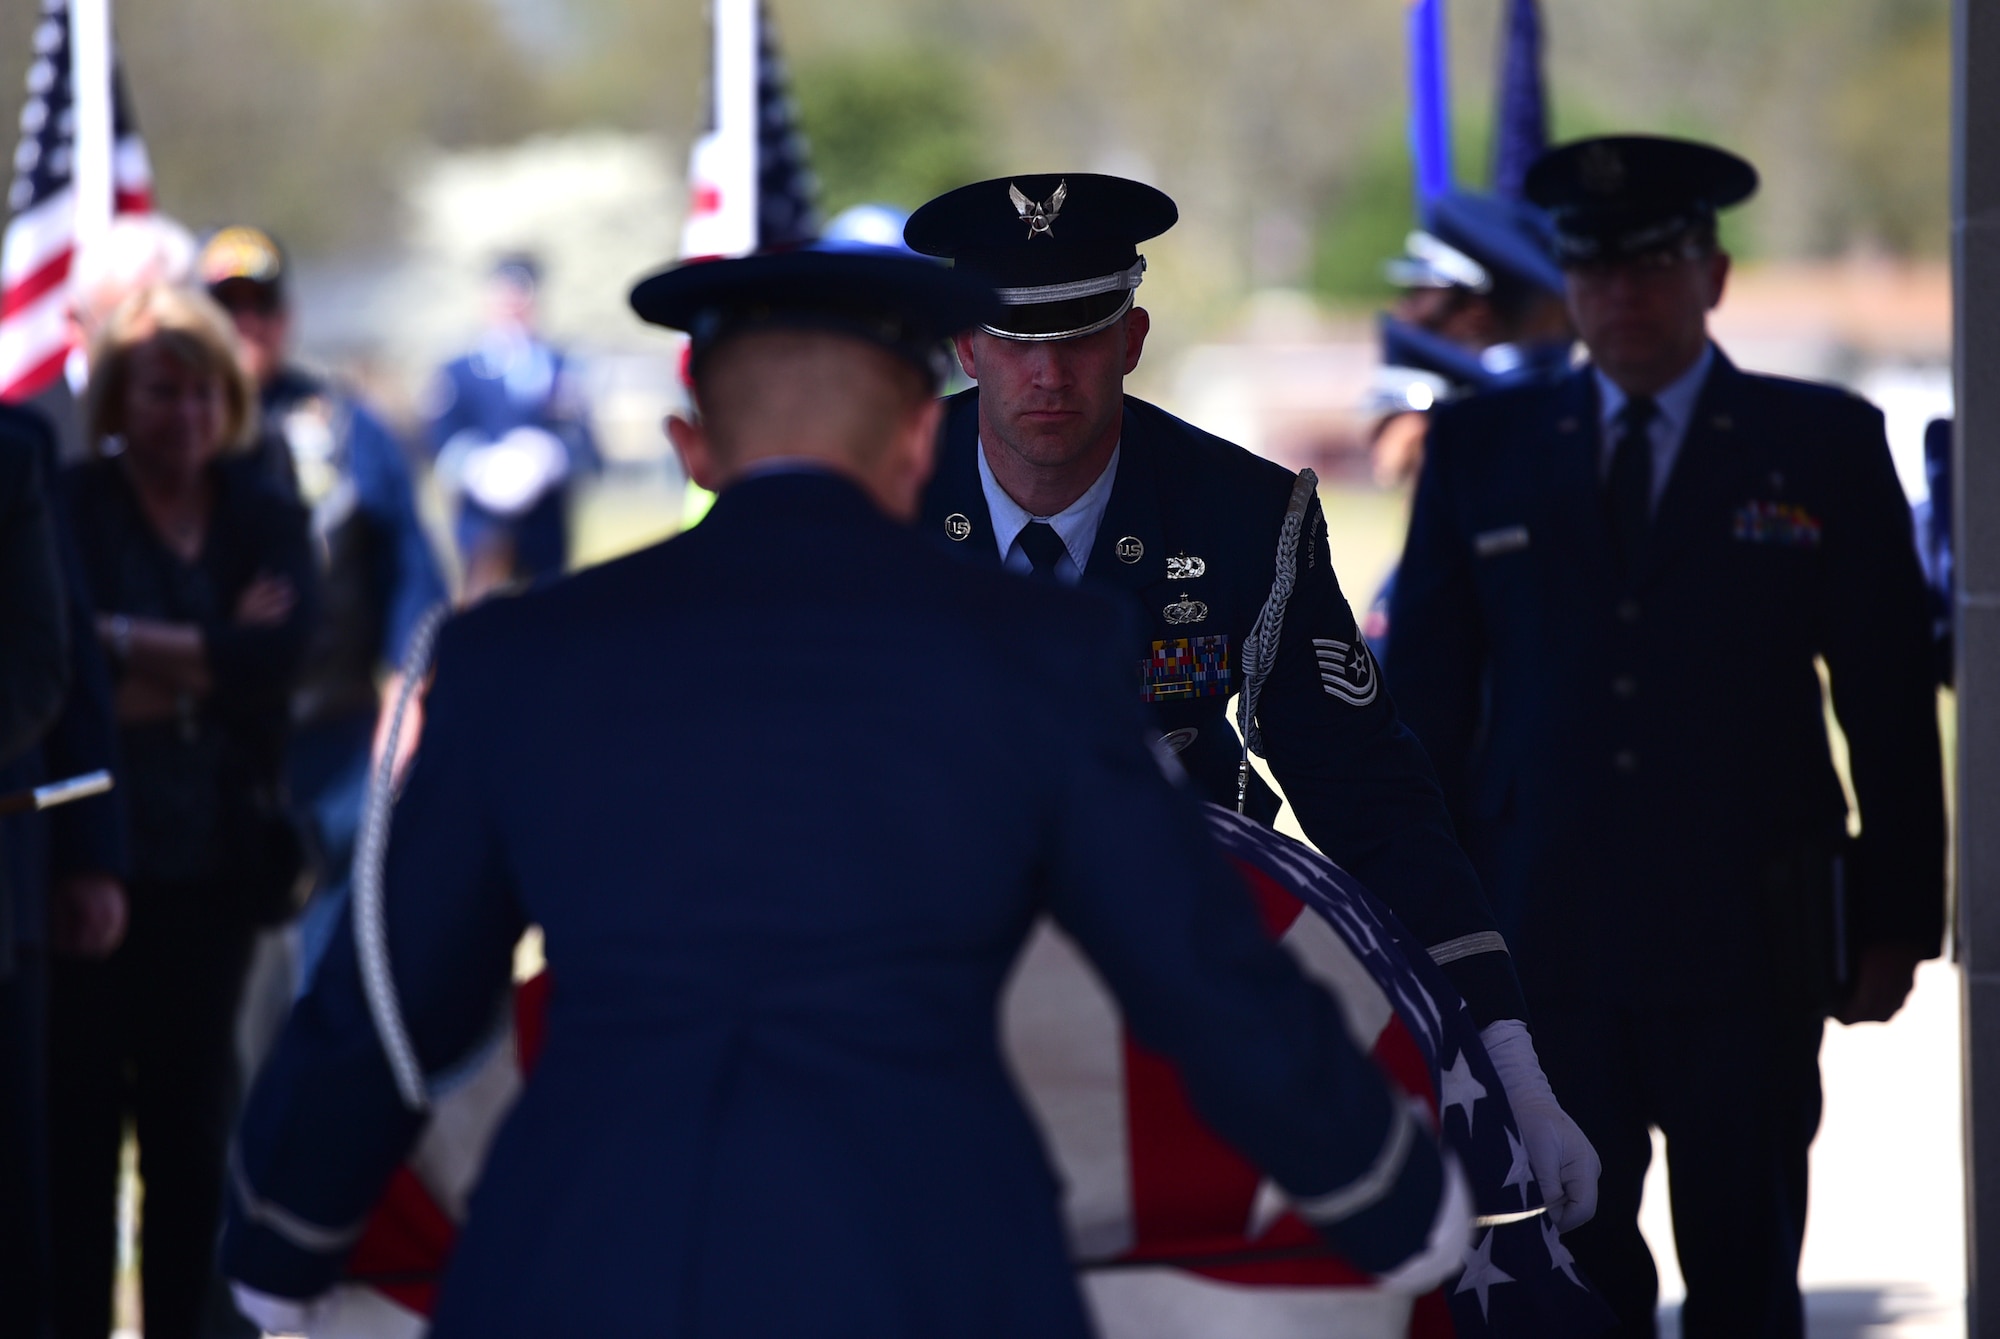 Seymour Johnson Air Force Base Honor Guardsmen prepare to fold a flag in honor of Col. Edgar Davis during his funeral ceremony April 6, 2018, Goldsboro, North Carolina. Davis served as an RF-4C Phantom navigator during the Vietnam War assigned to the 11th Tactical Reconnaissance Squadron. The unit exists today as the 11th Attack Squadron flying the MQ-9 Reaper. (U.S. Air Force photo by Senior Airman Christian Clausen)